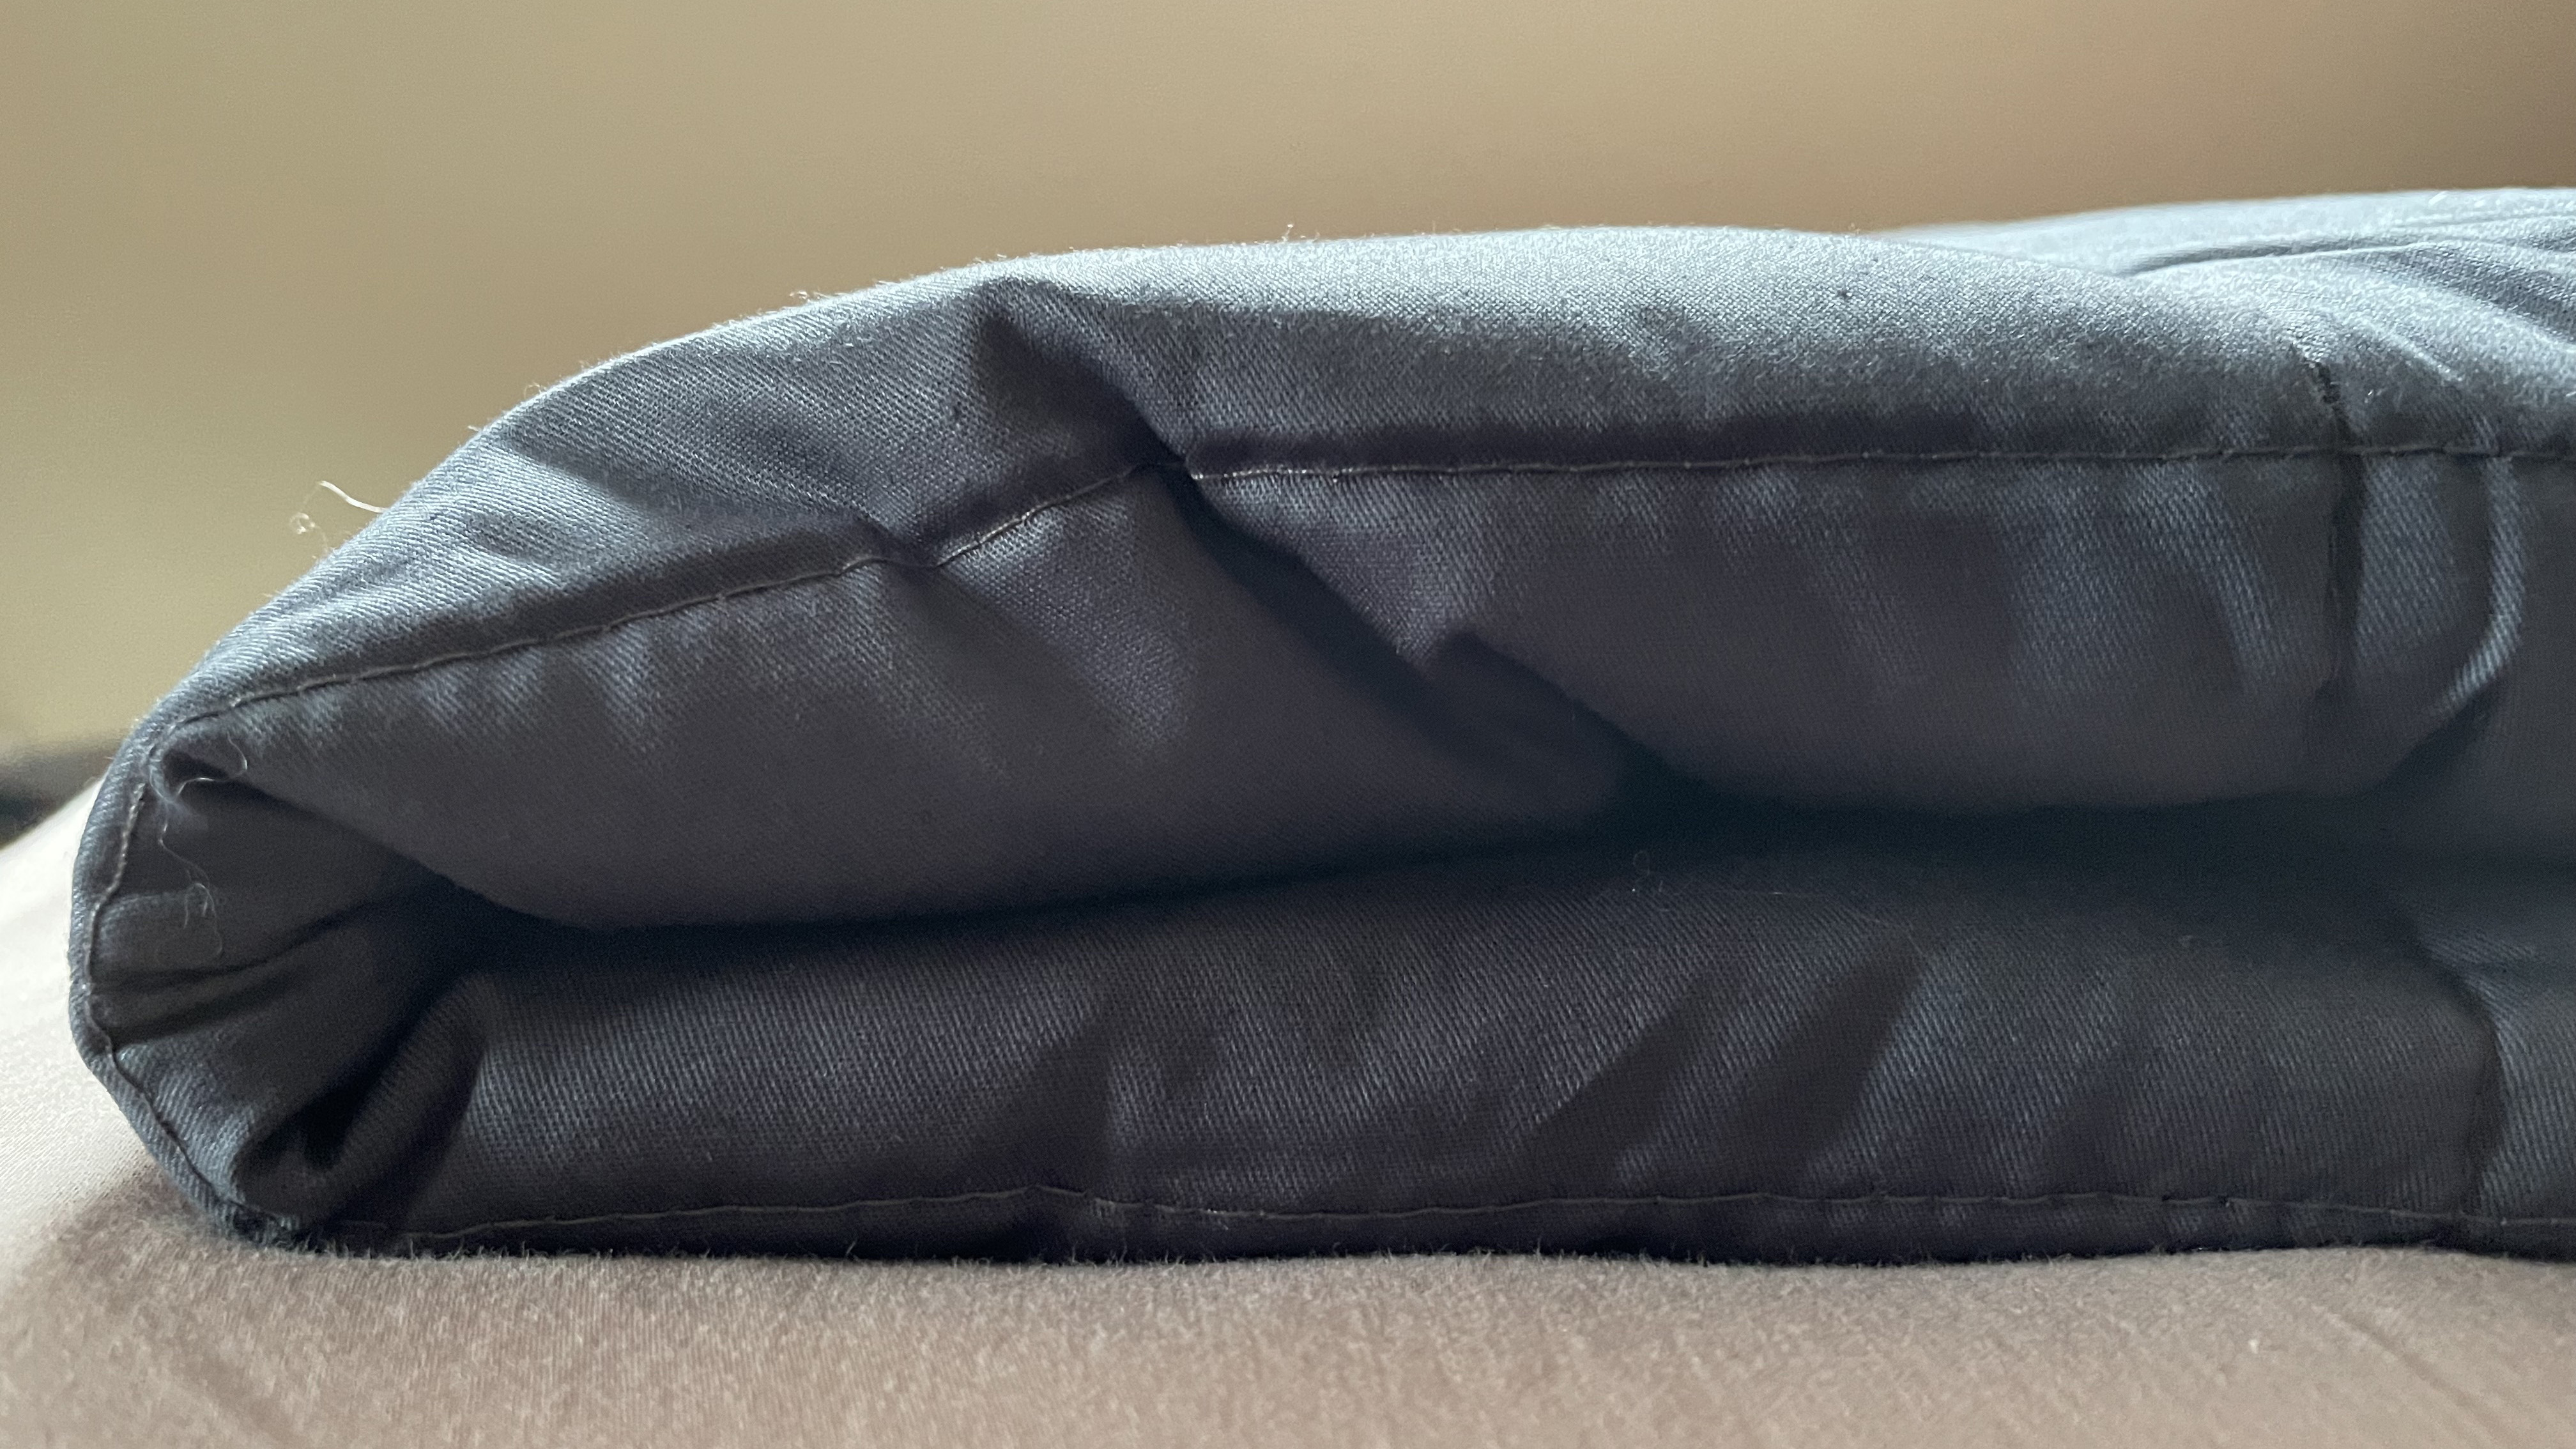 Luna Weighted Blanket review: the blanket shown folded from the side